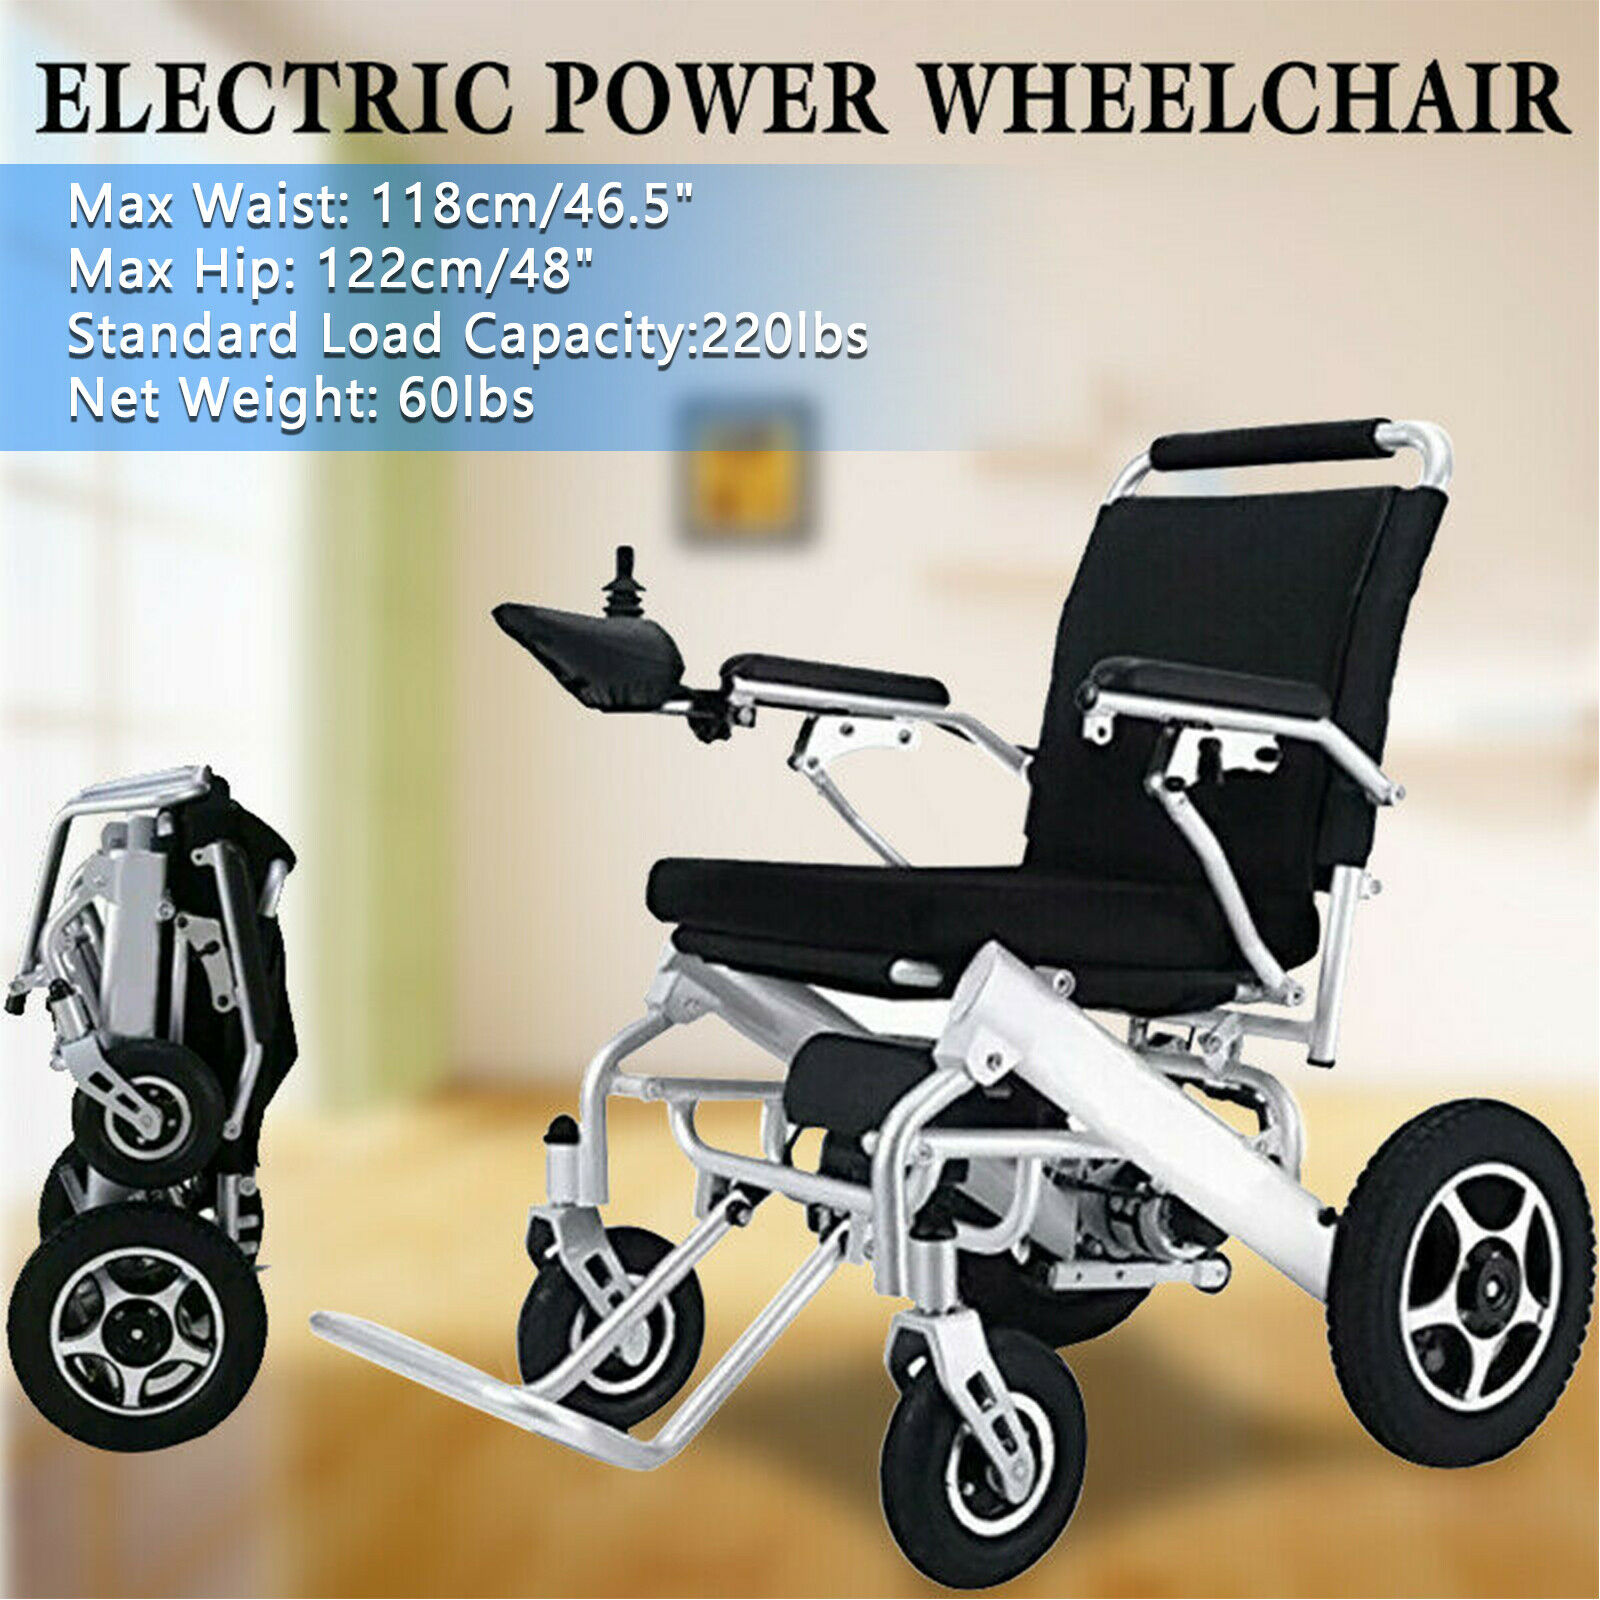 Electric Wheelchair Power Wheel chair Lightweight Mobility Aid Motorized Folding